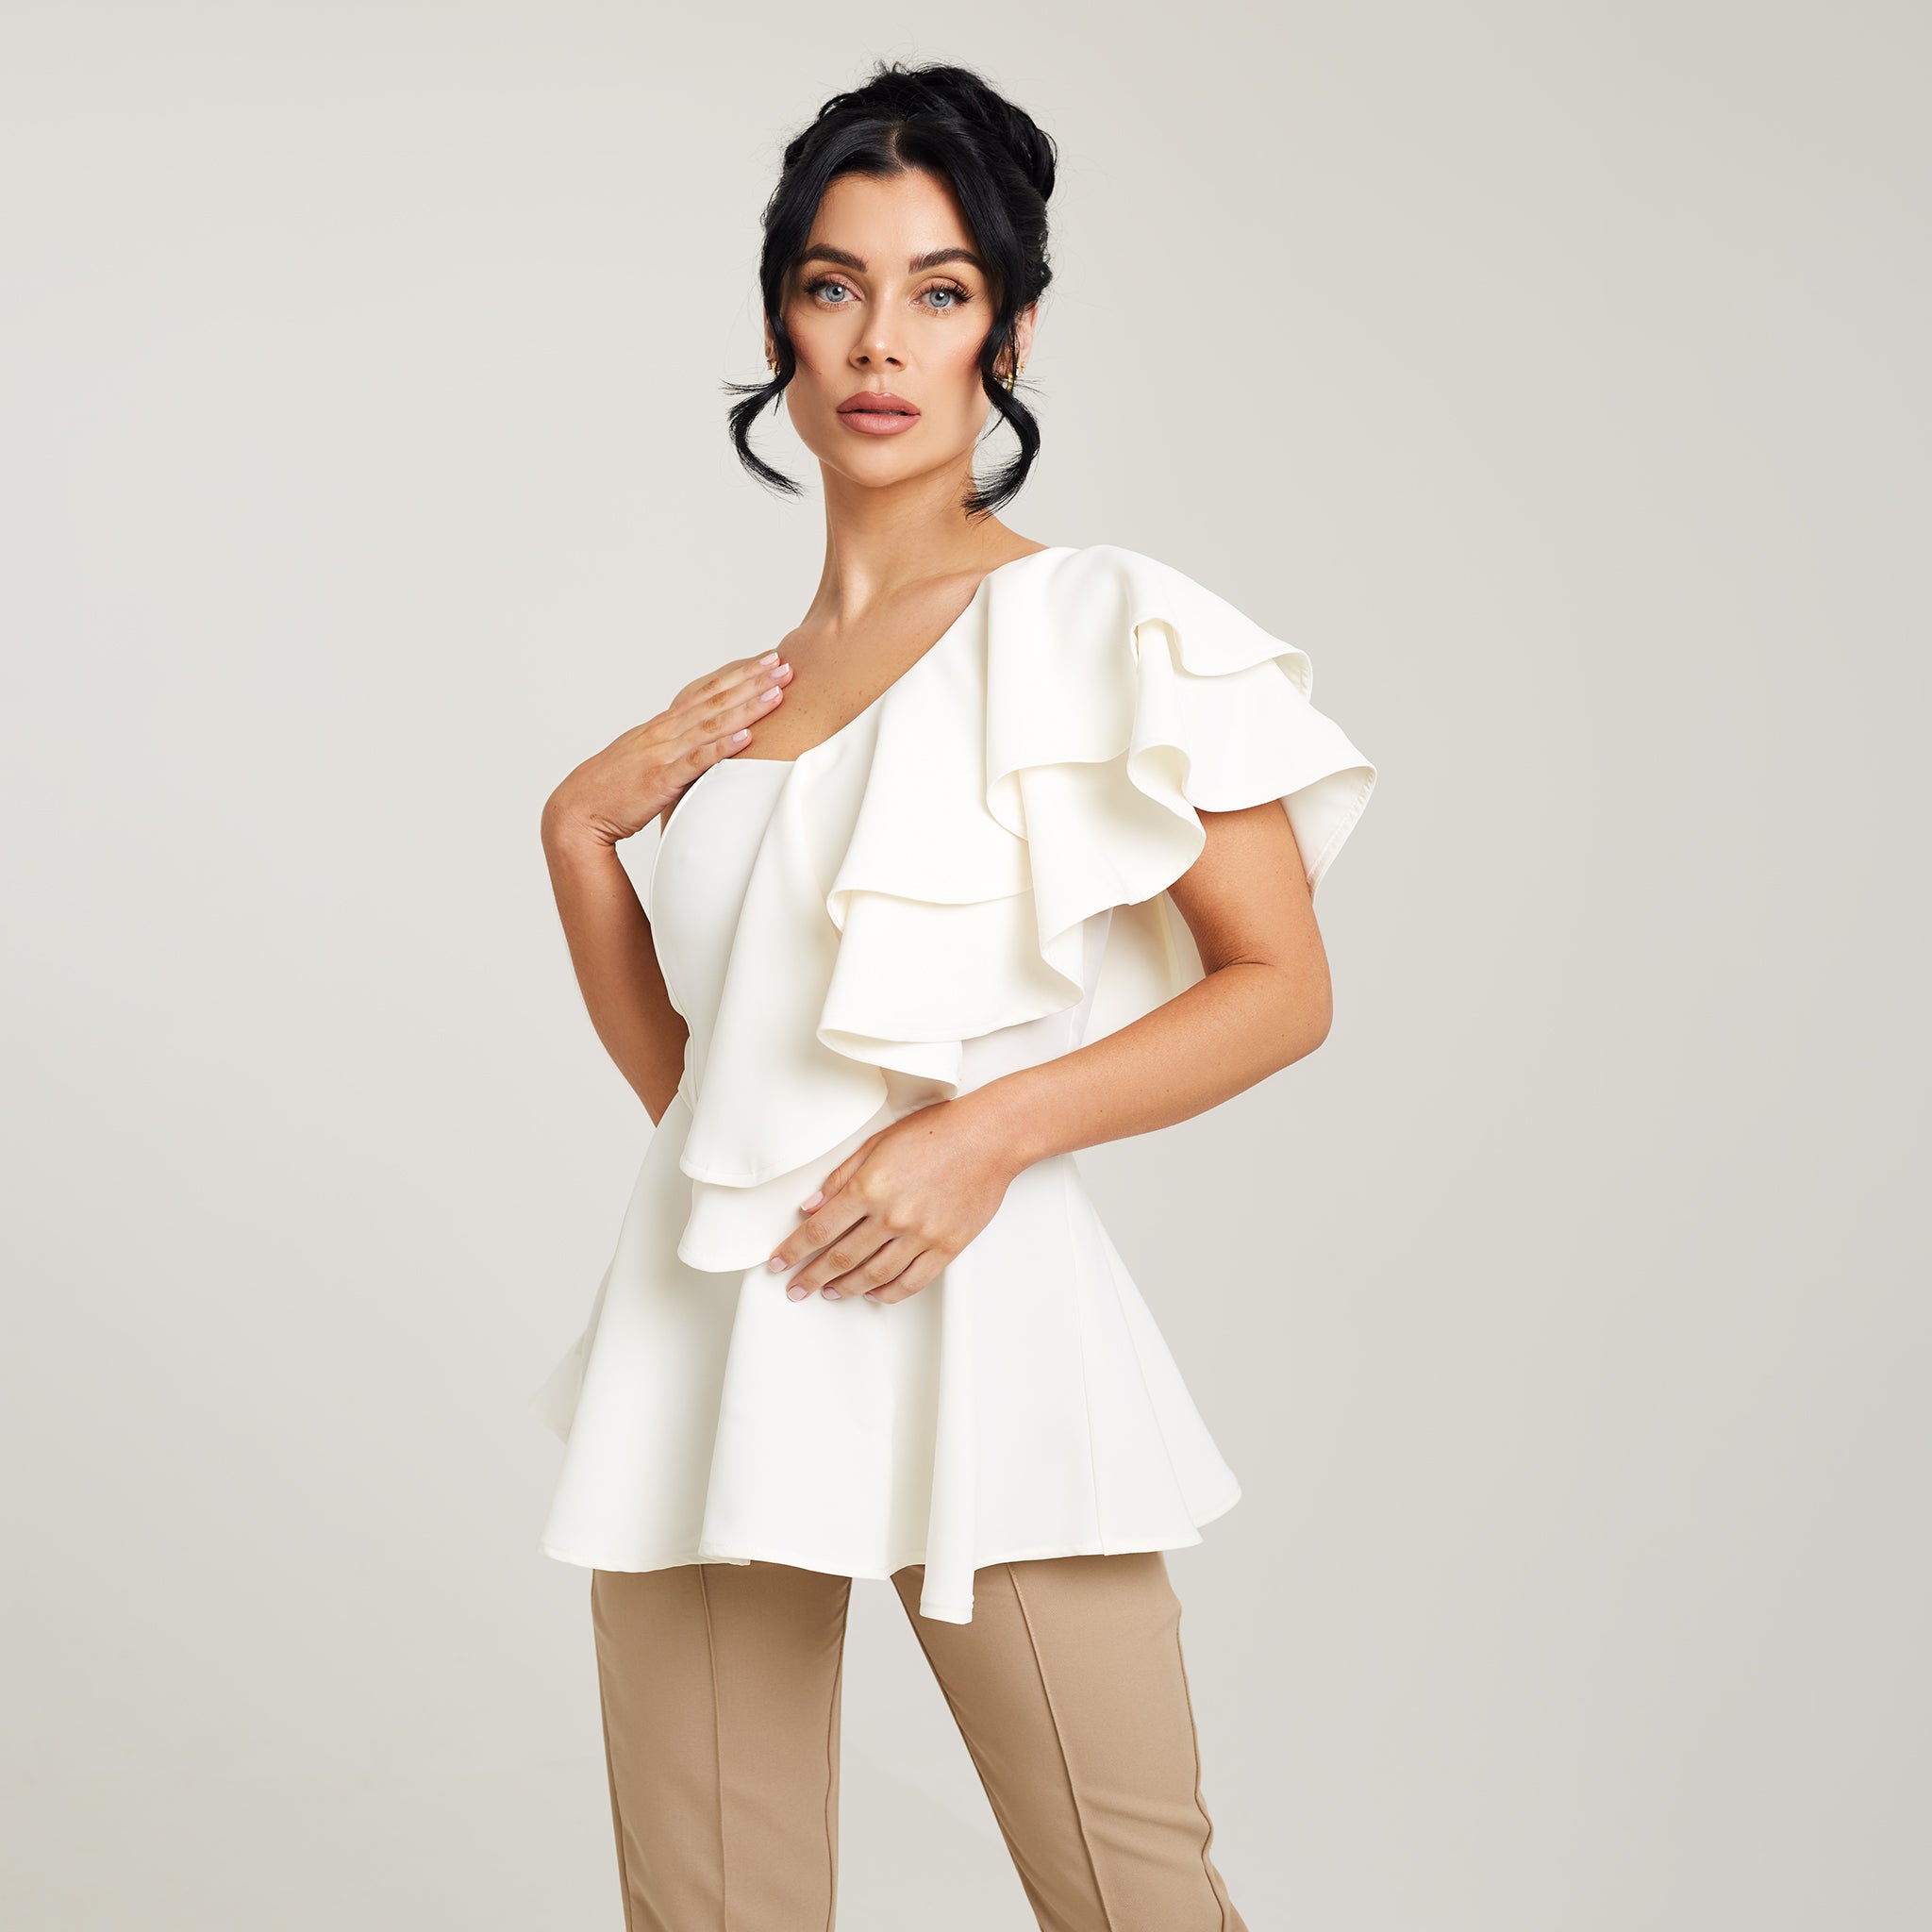 Cally Jane Beech, a woman with her hair elegantly styled up, models a cream-colored one-shoulder ruffle peplum top. The top features a single shoulder strap, showcasing an asymmetrical neckline, while the ruffle detail gracefully drapes down the bodice, creating a feminine and sophisticated look. The peplum waistline accentuates Cally Jane Beech's figure, adding a touch of flounce and elegance.